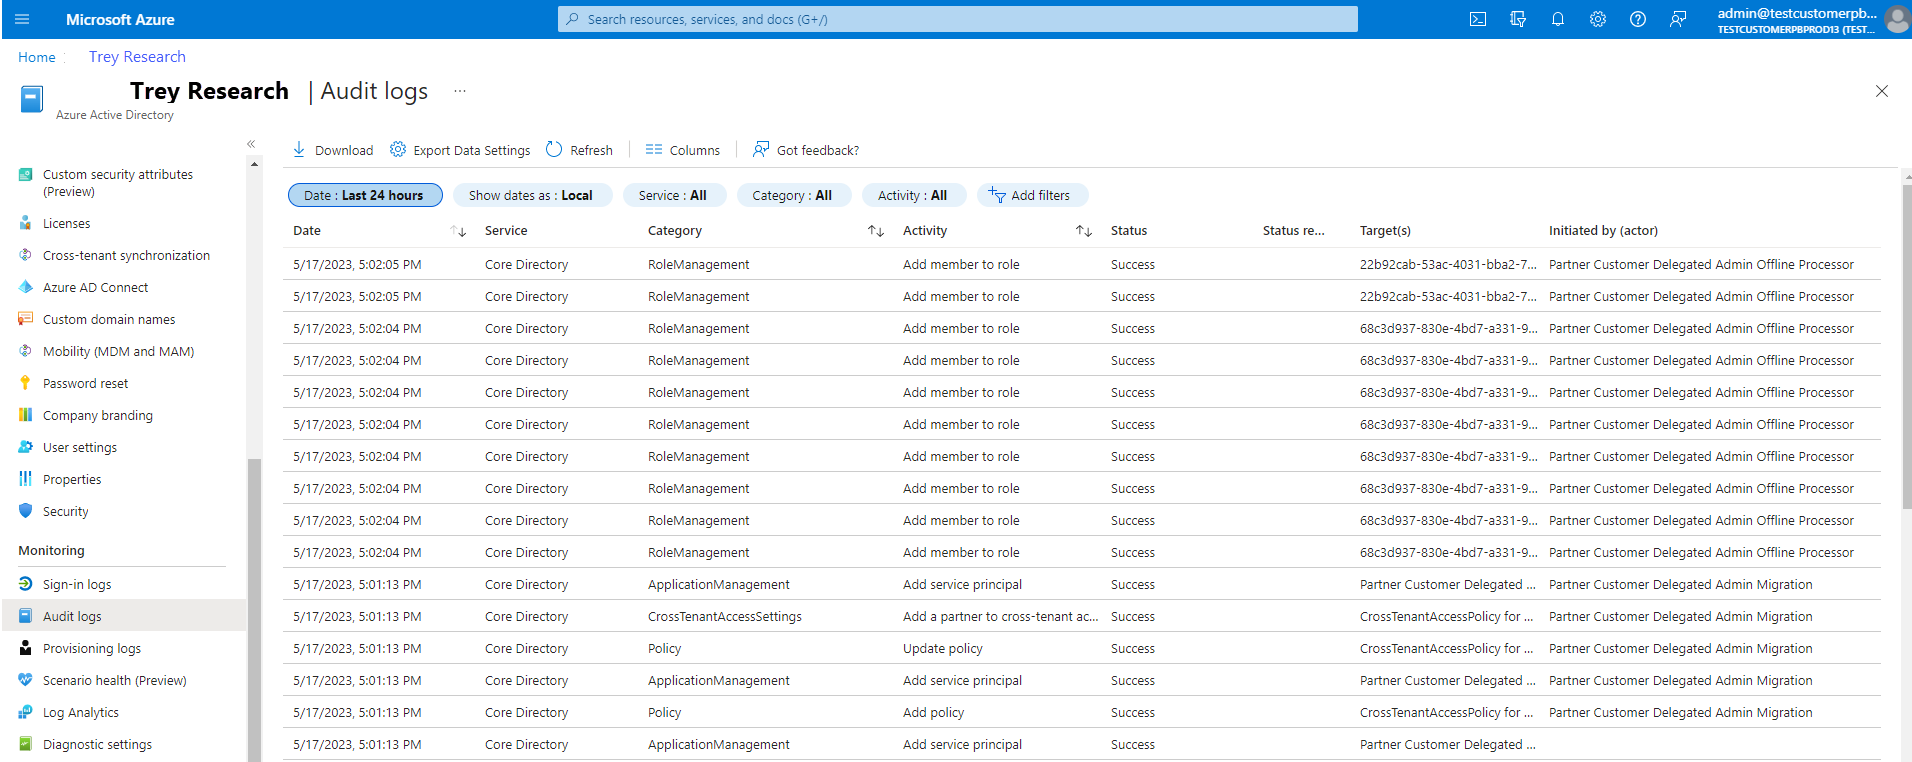 Screenshot of what the Audit logs in the customer tenant look like after the GDAP relationship is created through Microsoft-led transition: